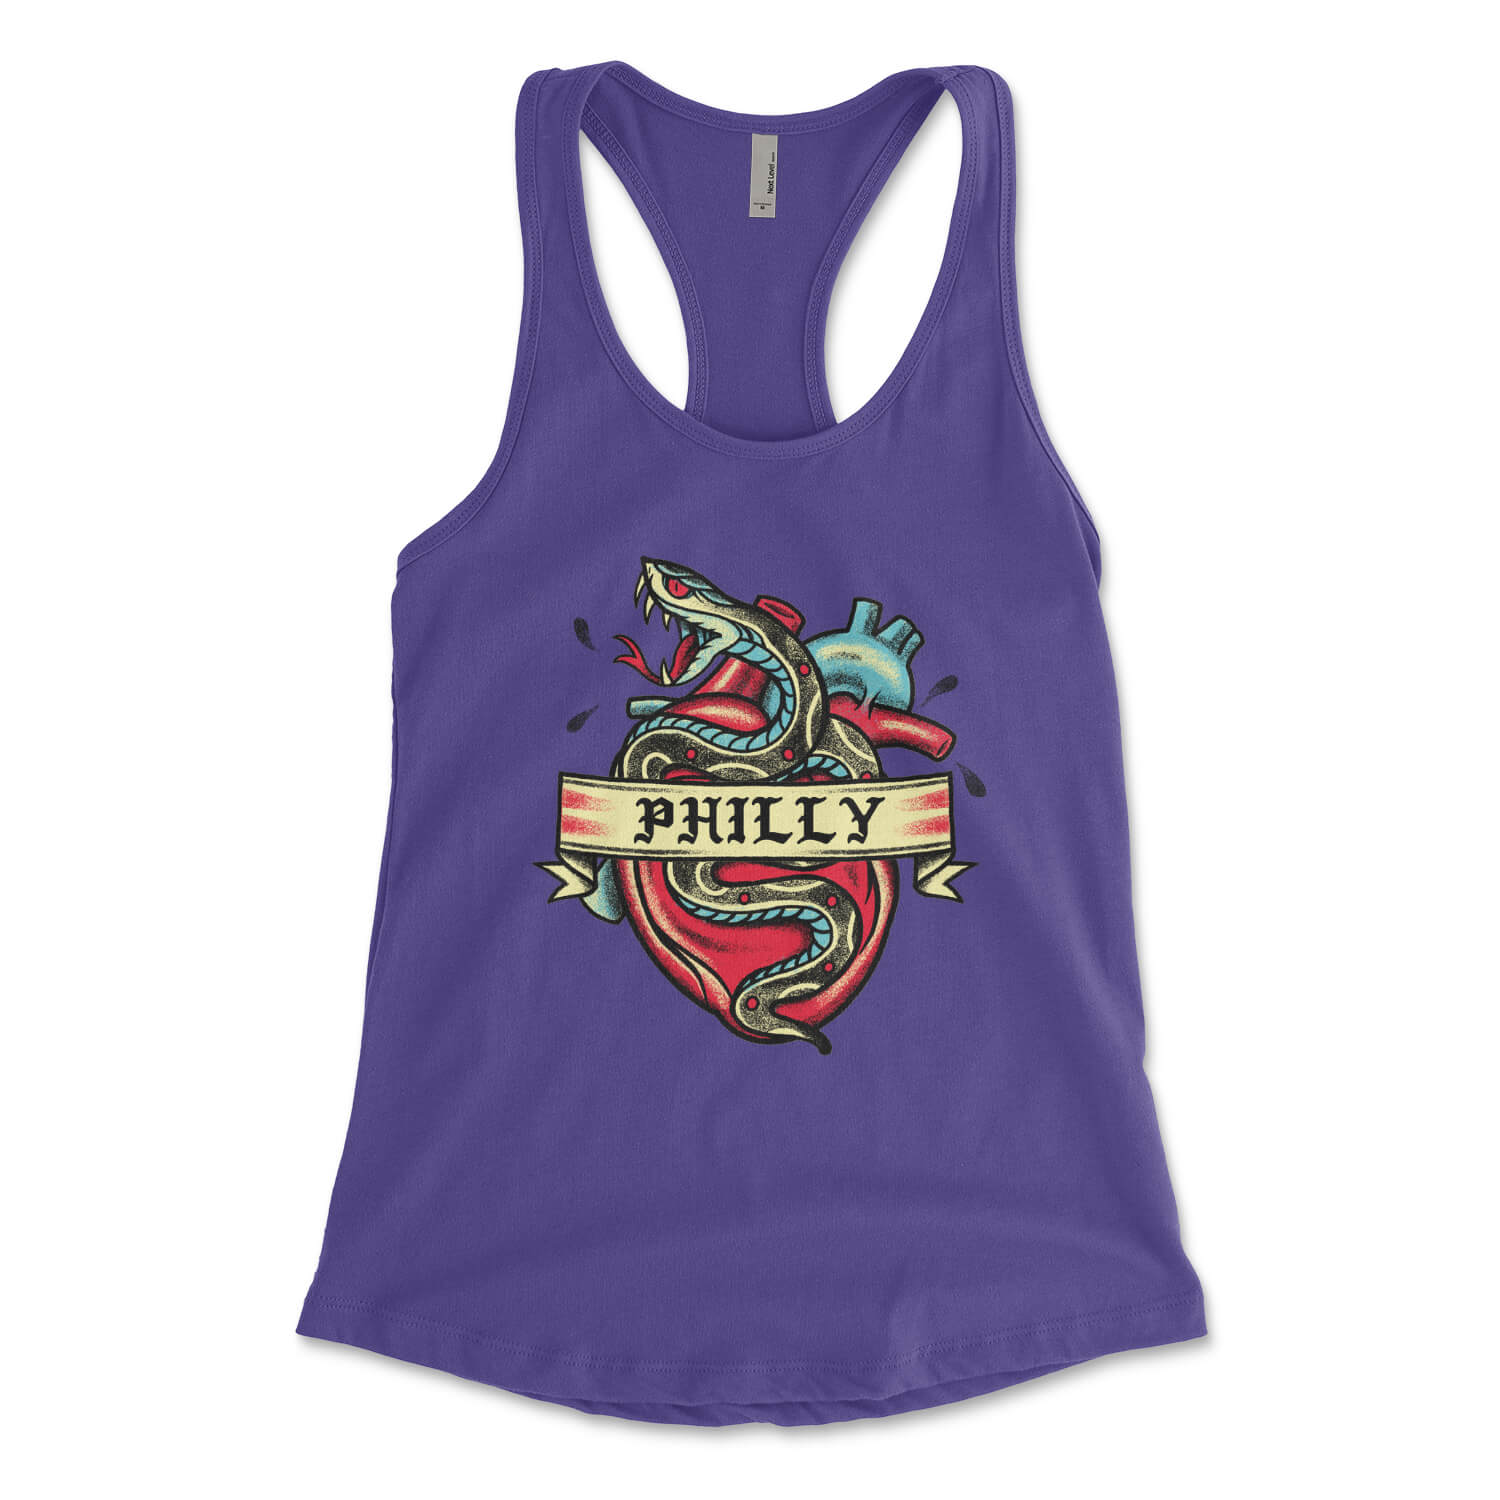 Philadelphia Philly snake tattoo on a purple womens racerback tank top from Phillygoat